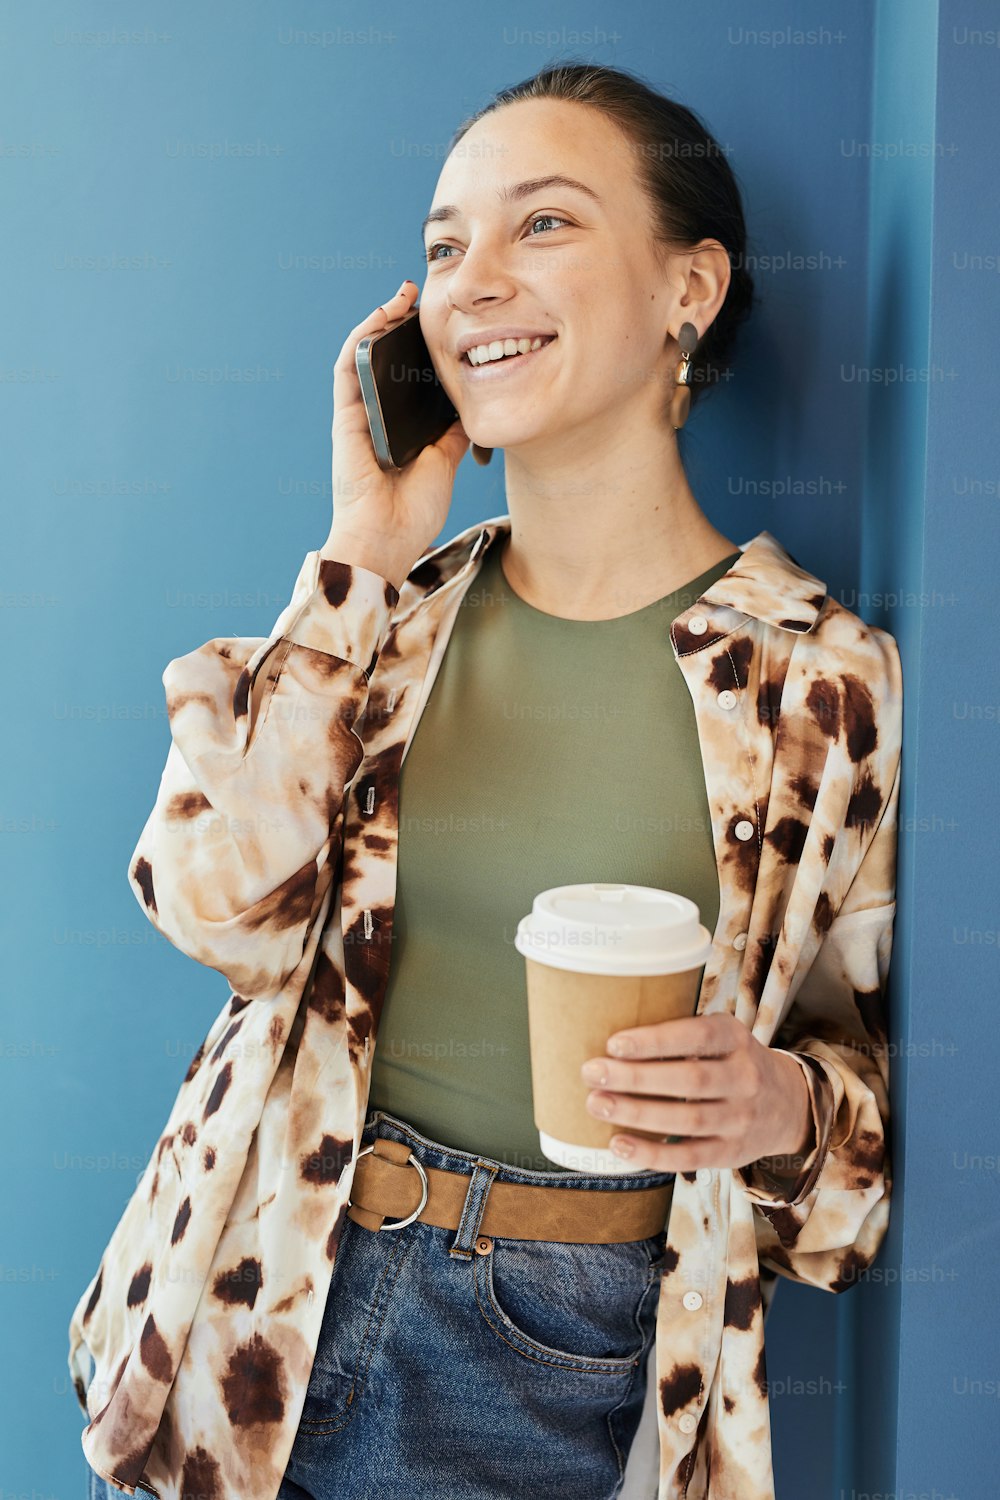 Vibrant portrait of young woman talking by smartphone while leaning casually against blue wall with genuine smile